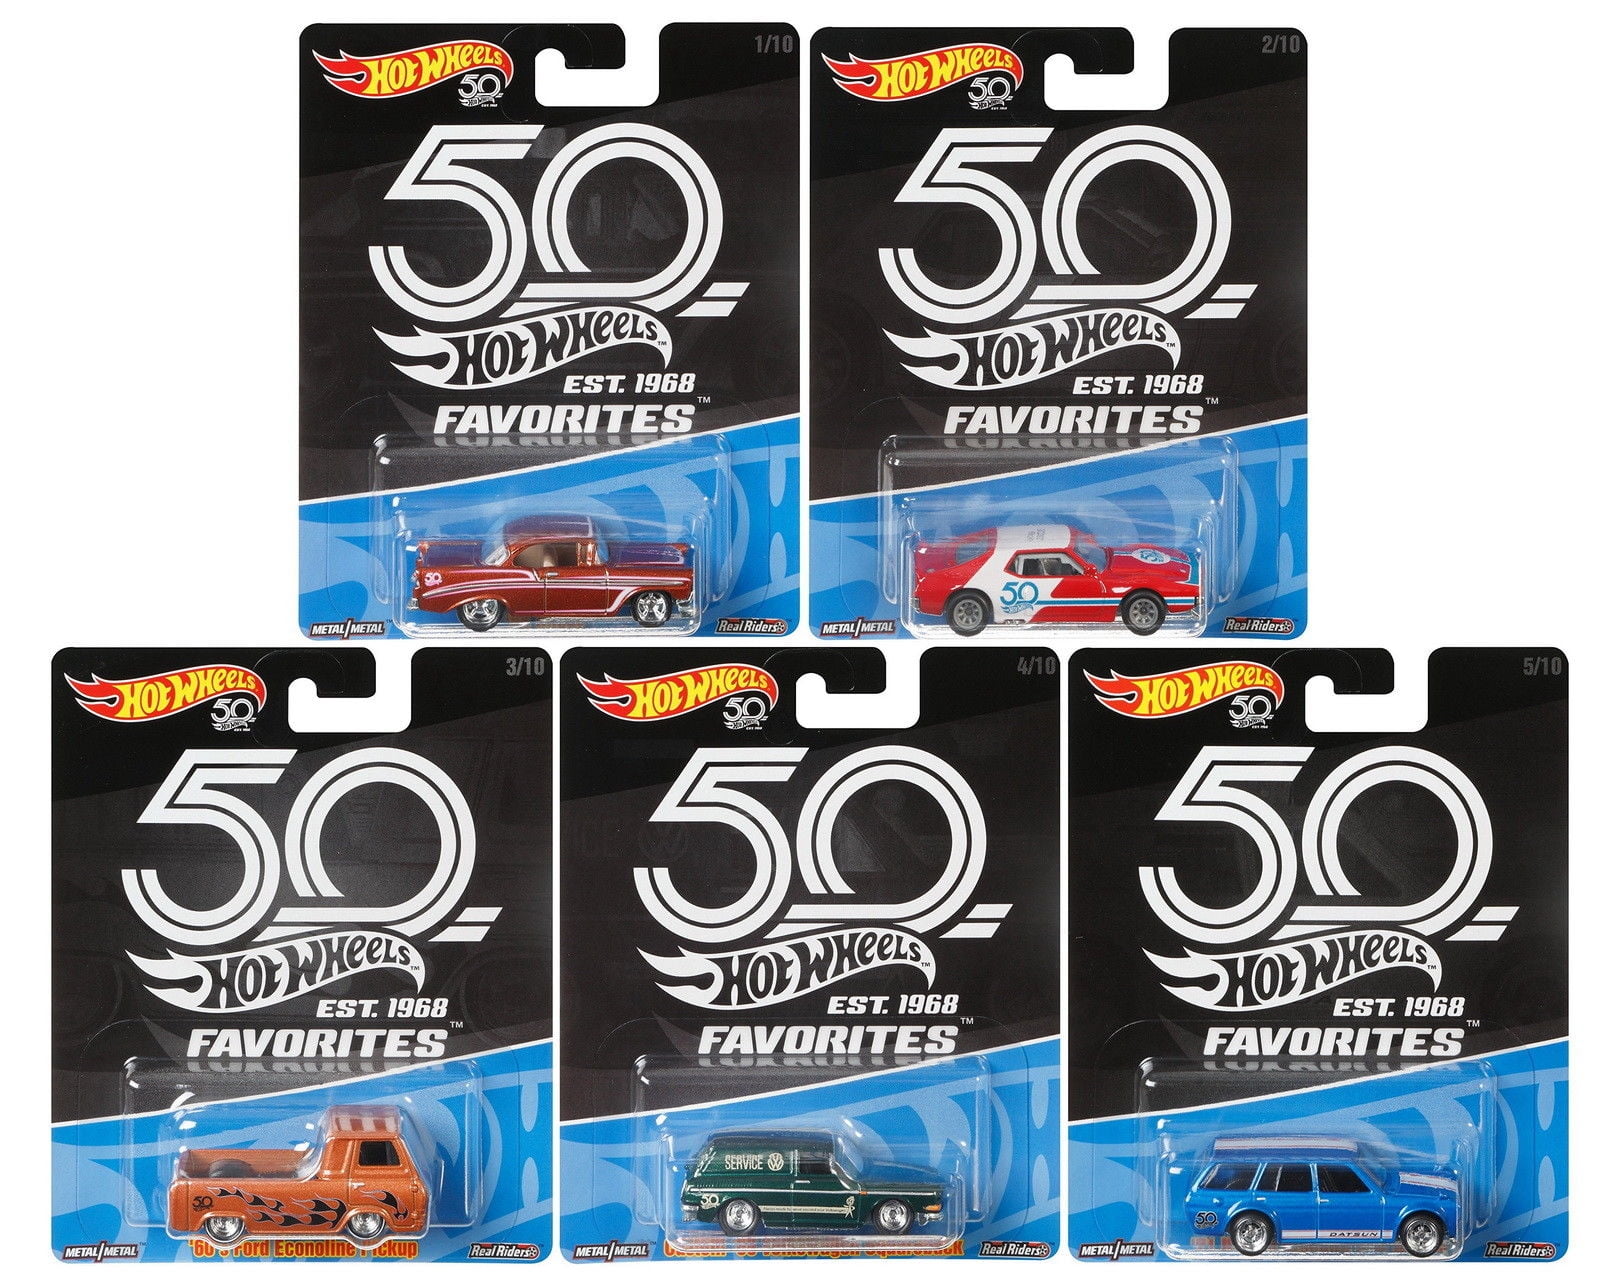 10 x 2018 Hot Wheels Cars 50th Anniversary Favorites 1/64 Brand New SEALED 